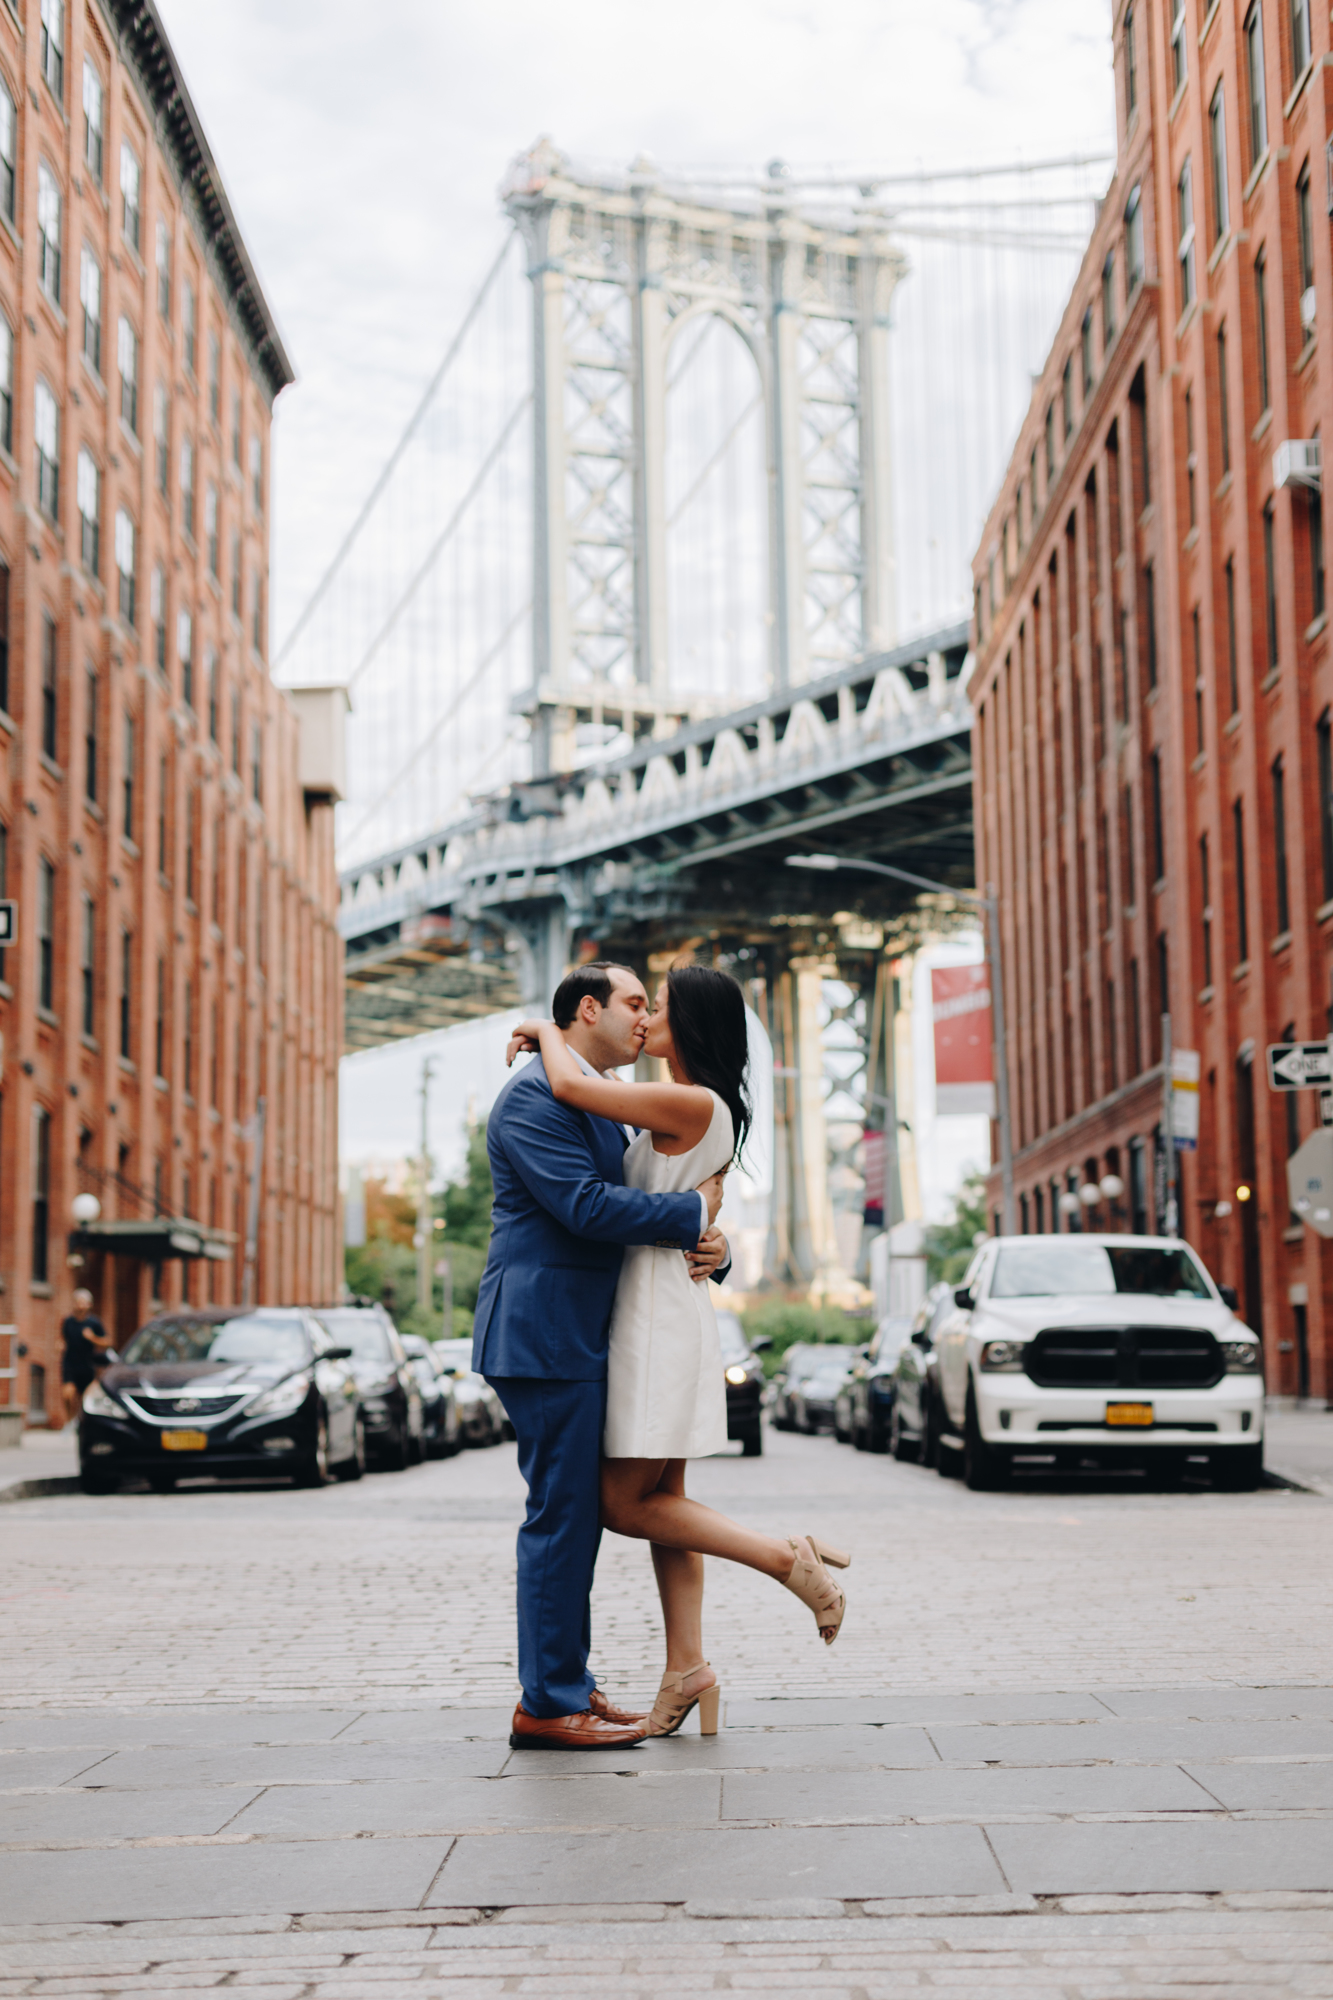 The top wedding photographers in New York City